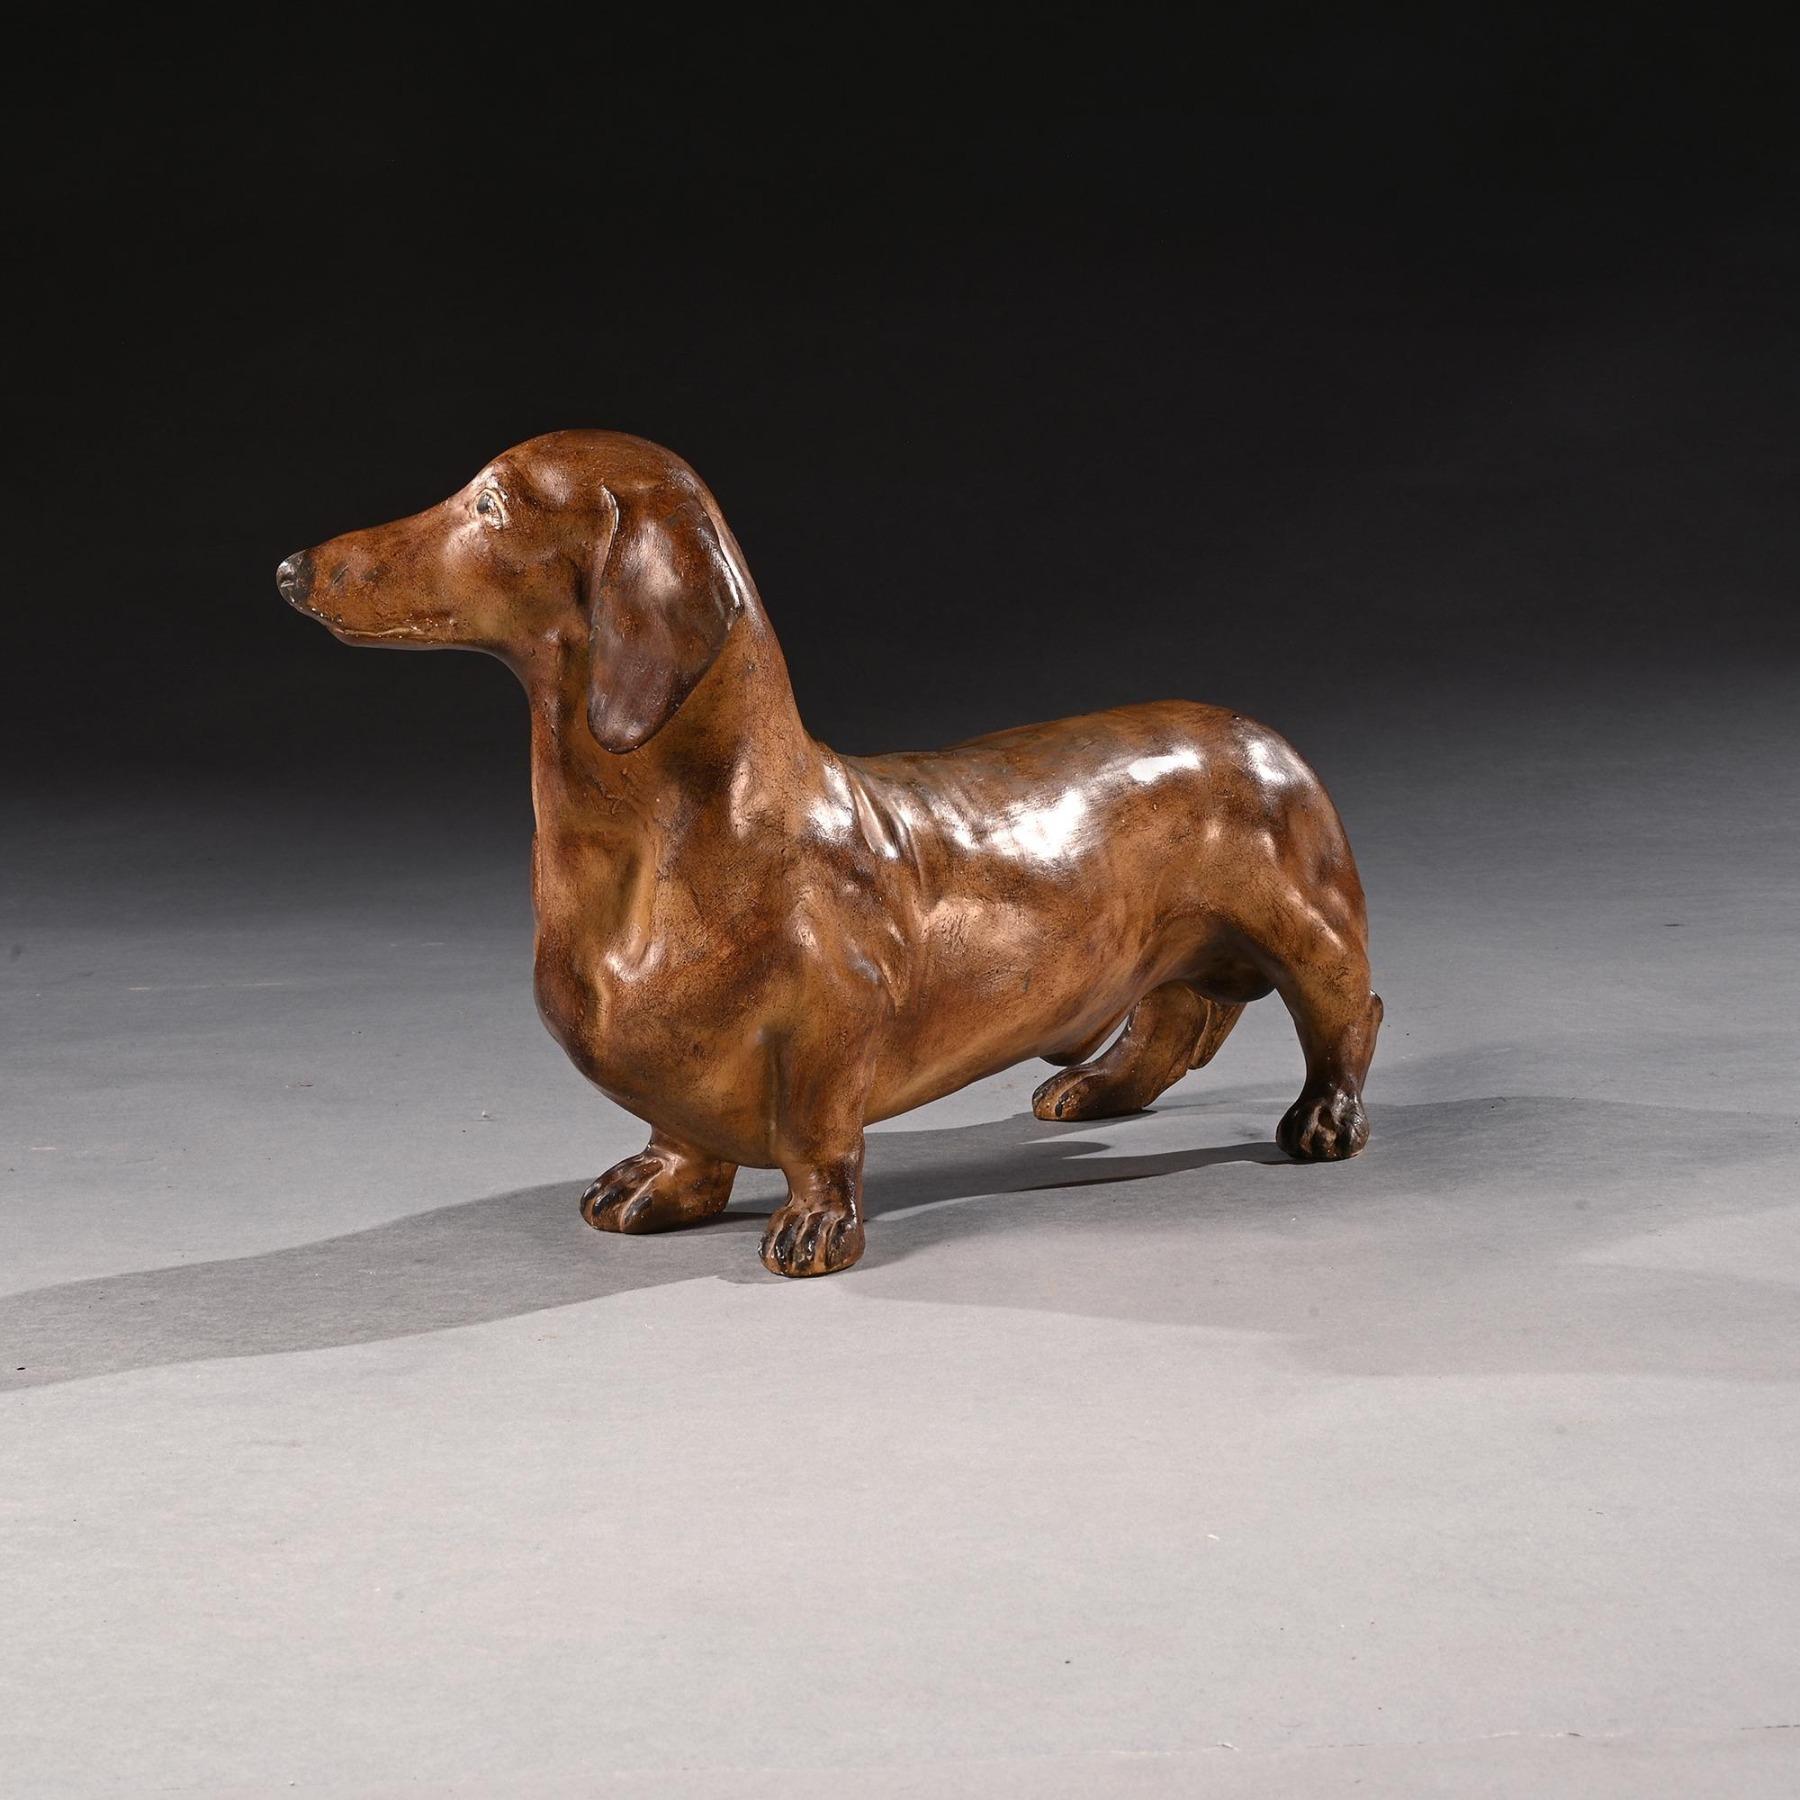 Early 20th Century Rare French Life-like Glazed Terracotta Sculpture of a Dachshund Dog For Sale